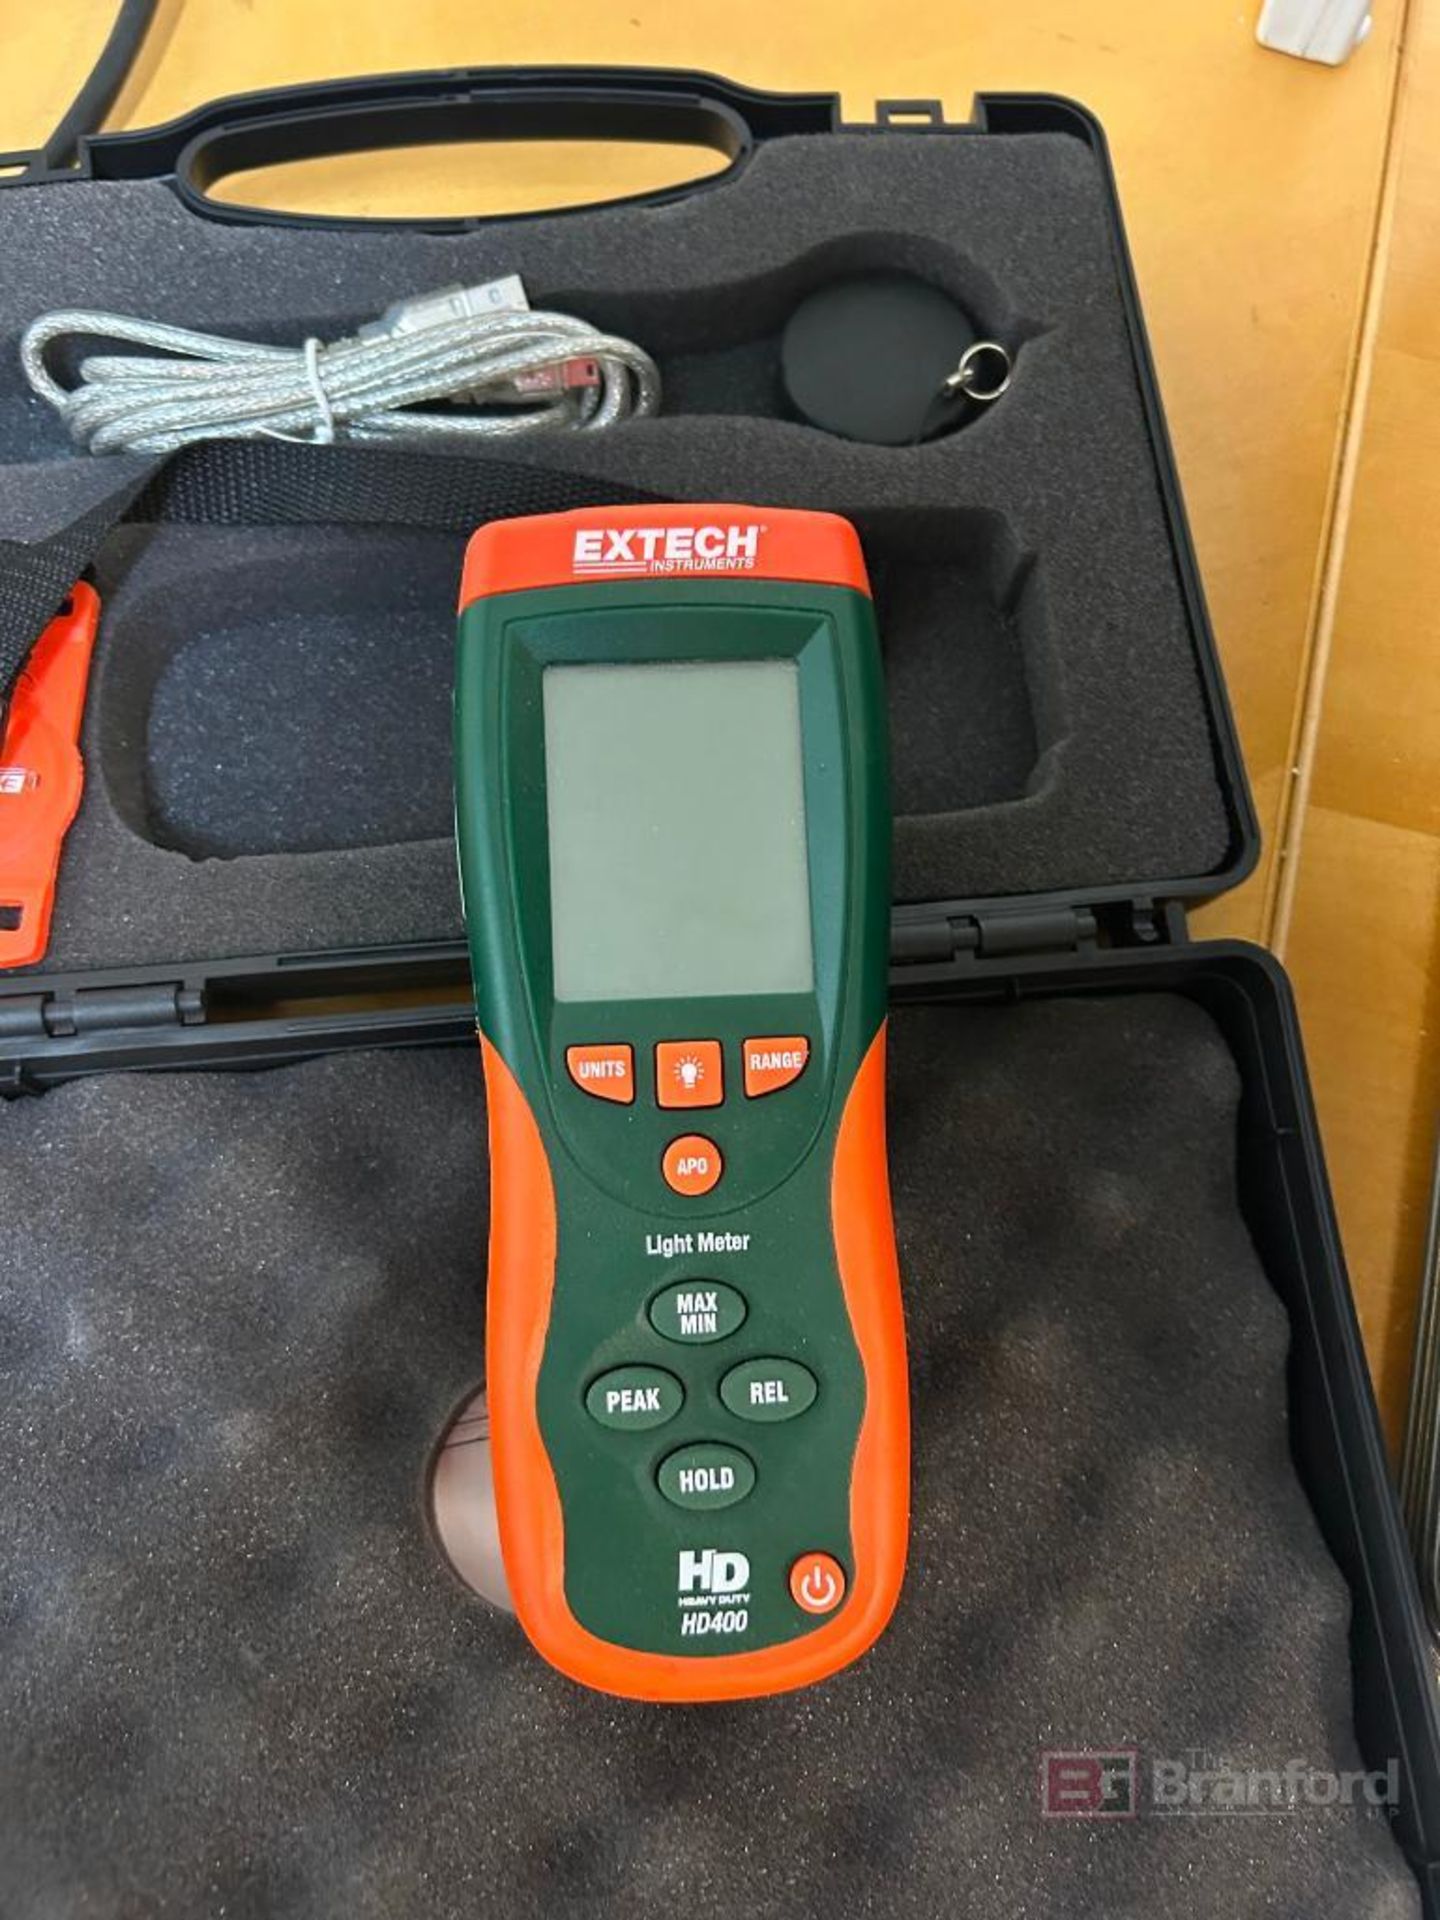 Extech HD400 Light Meter I Case - Image 2 of 3